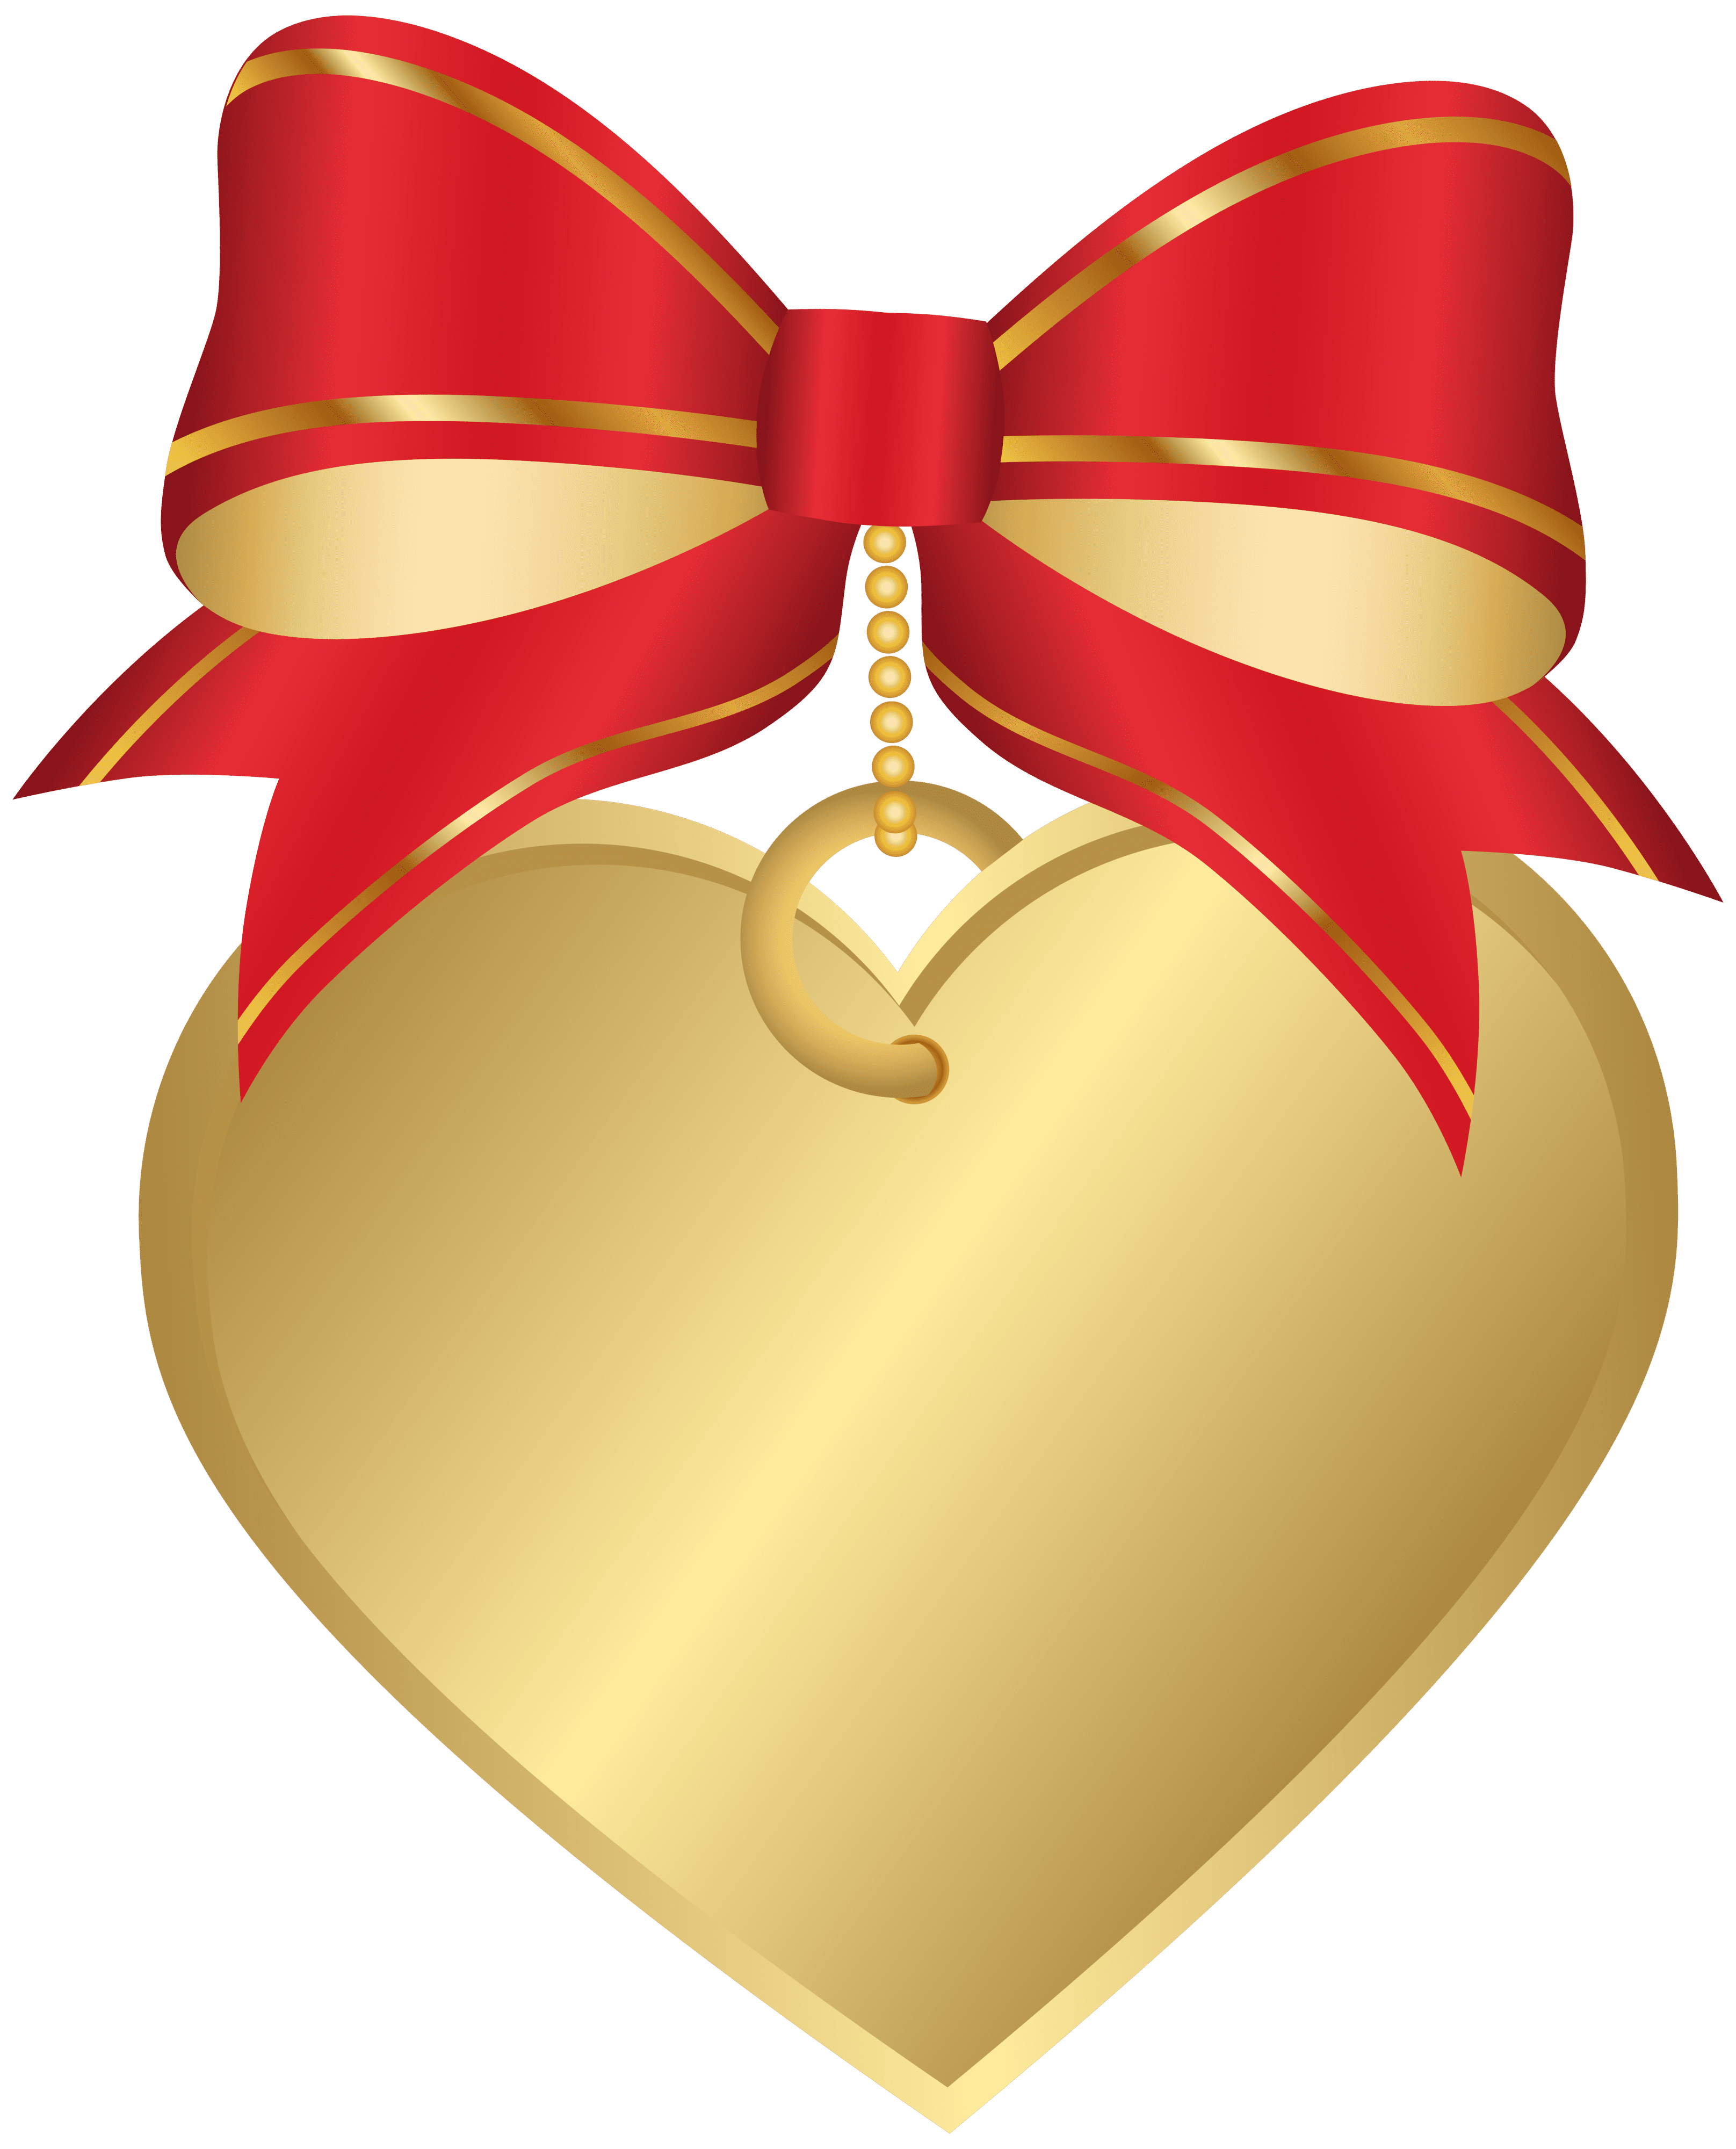 Gold Heart with Red Bow Transparent PNG Clip Art Image